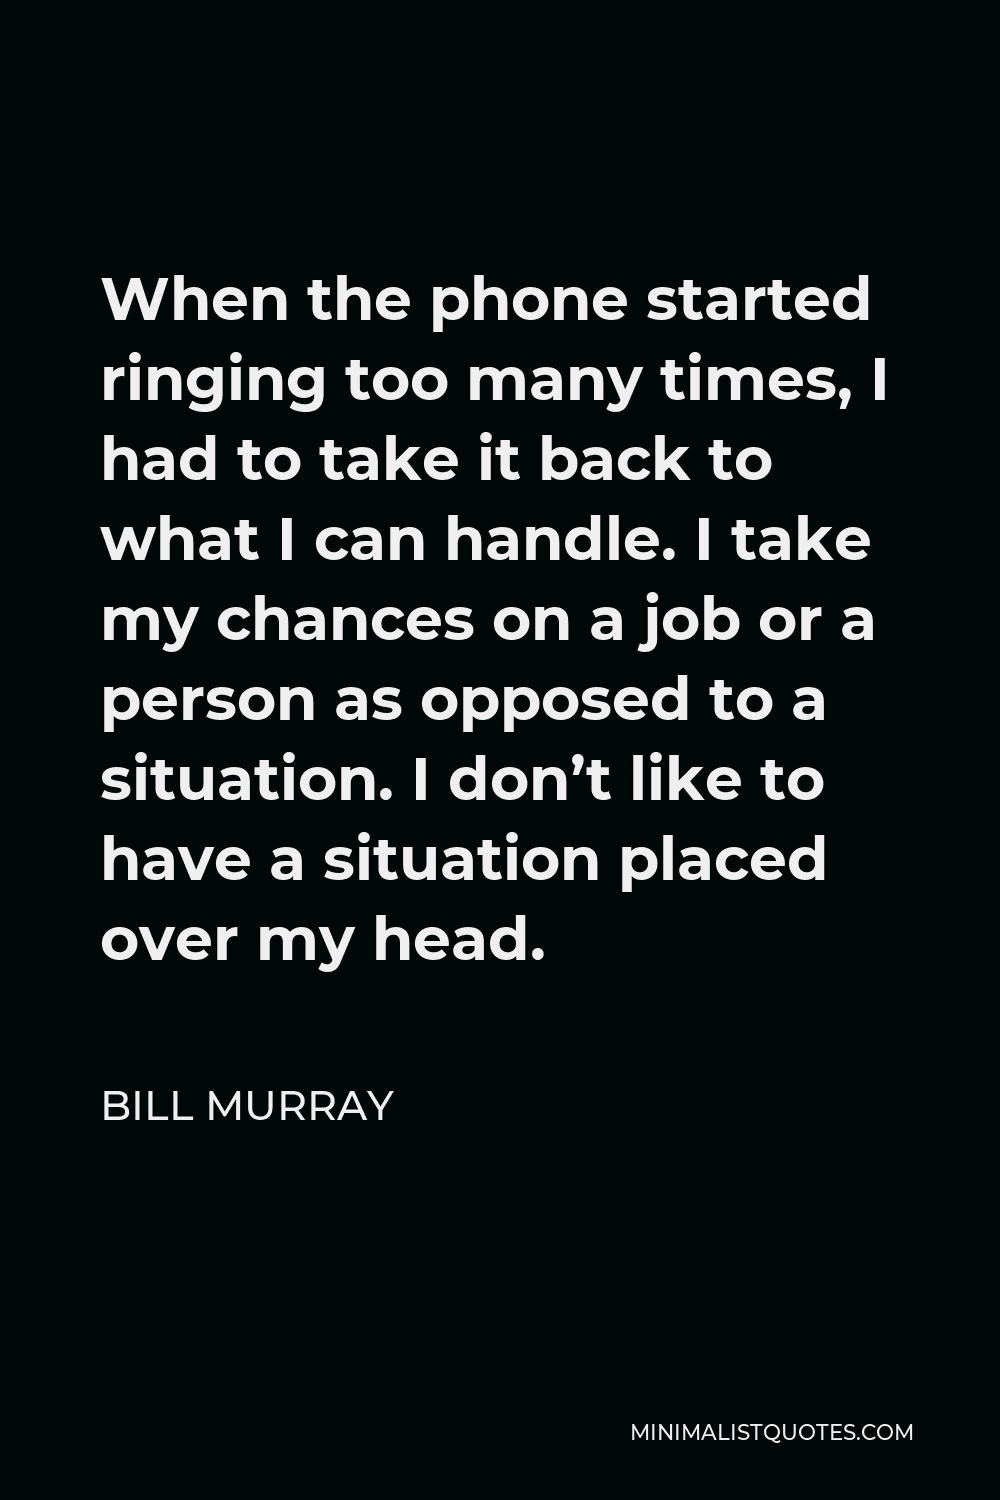 Bill Murray Quote - When the phone started ringing too many times, I had to take it back to what I can handle. I take my chances on a job or a person as opposed to a situation. I don’t like to have a situation placed over my head.